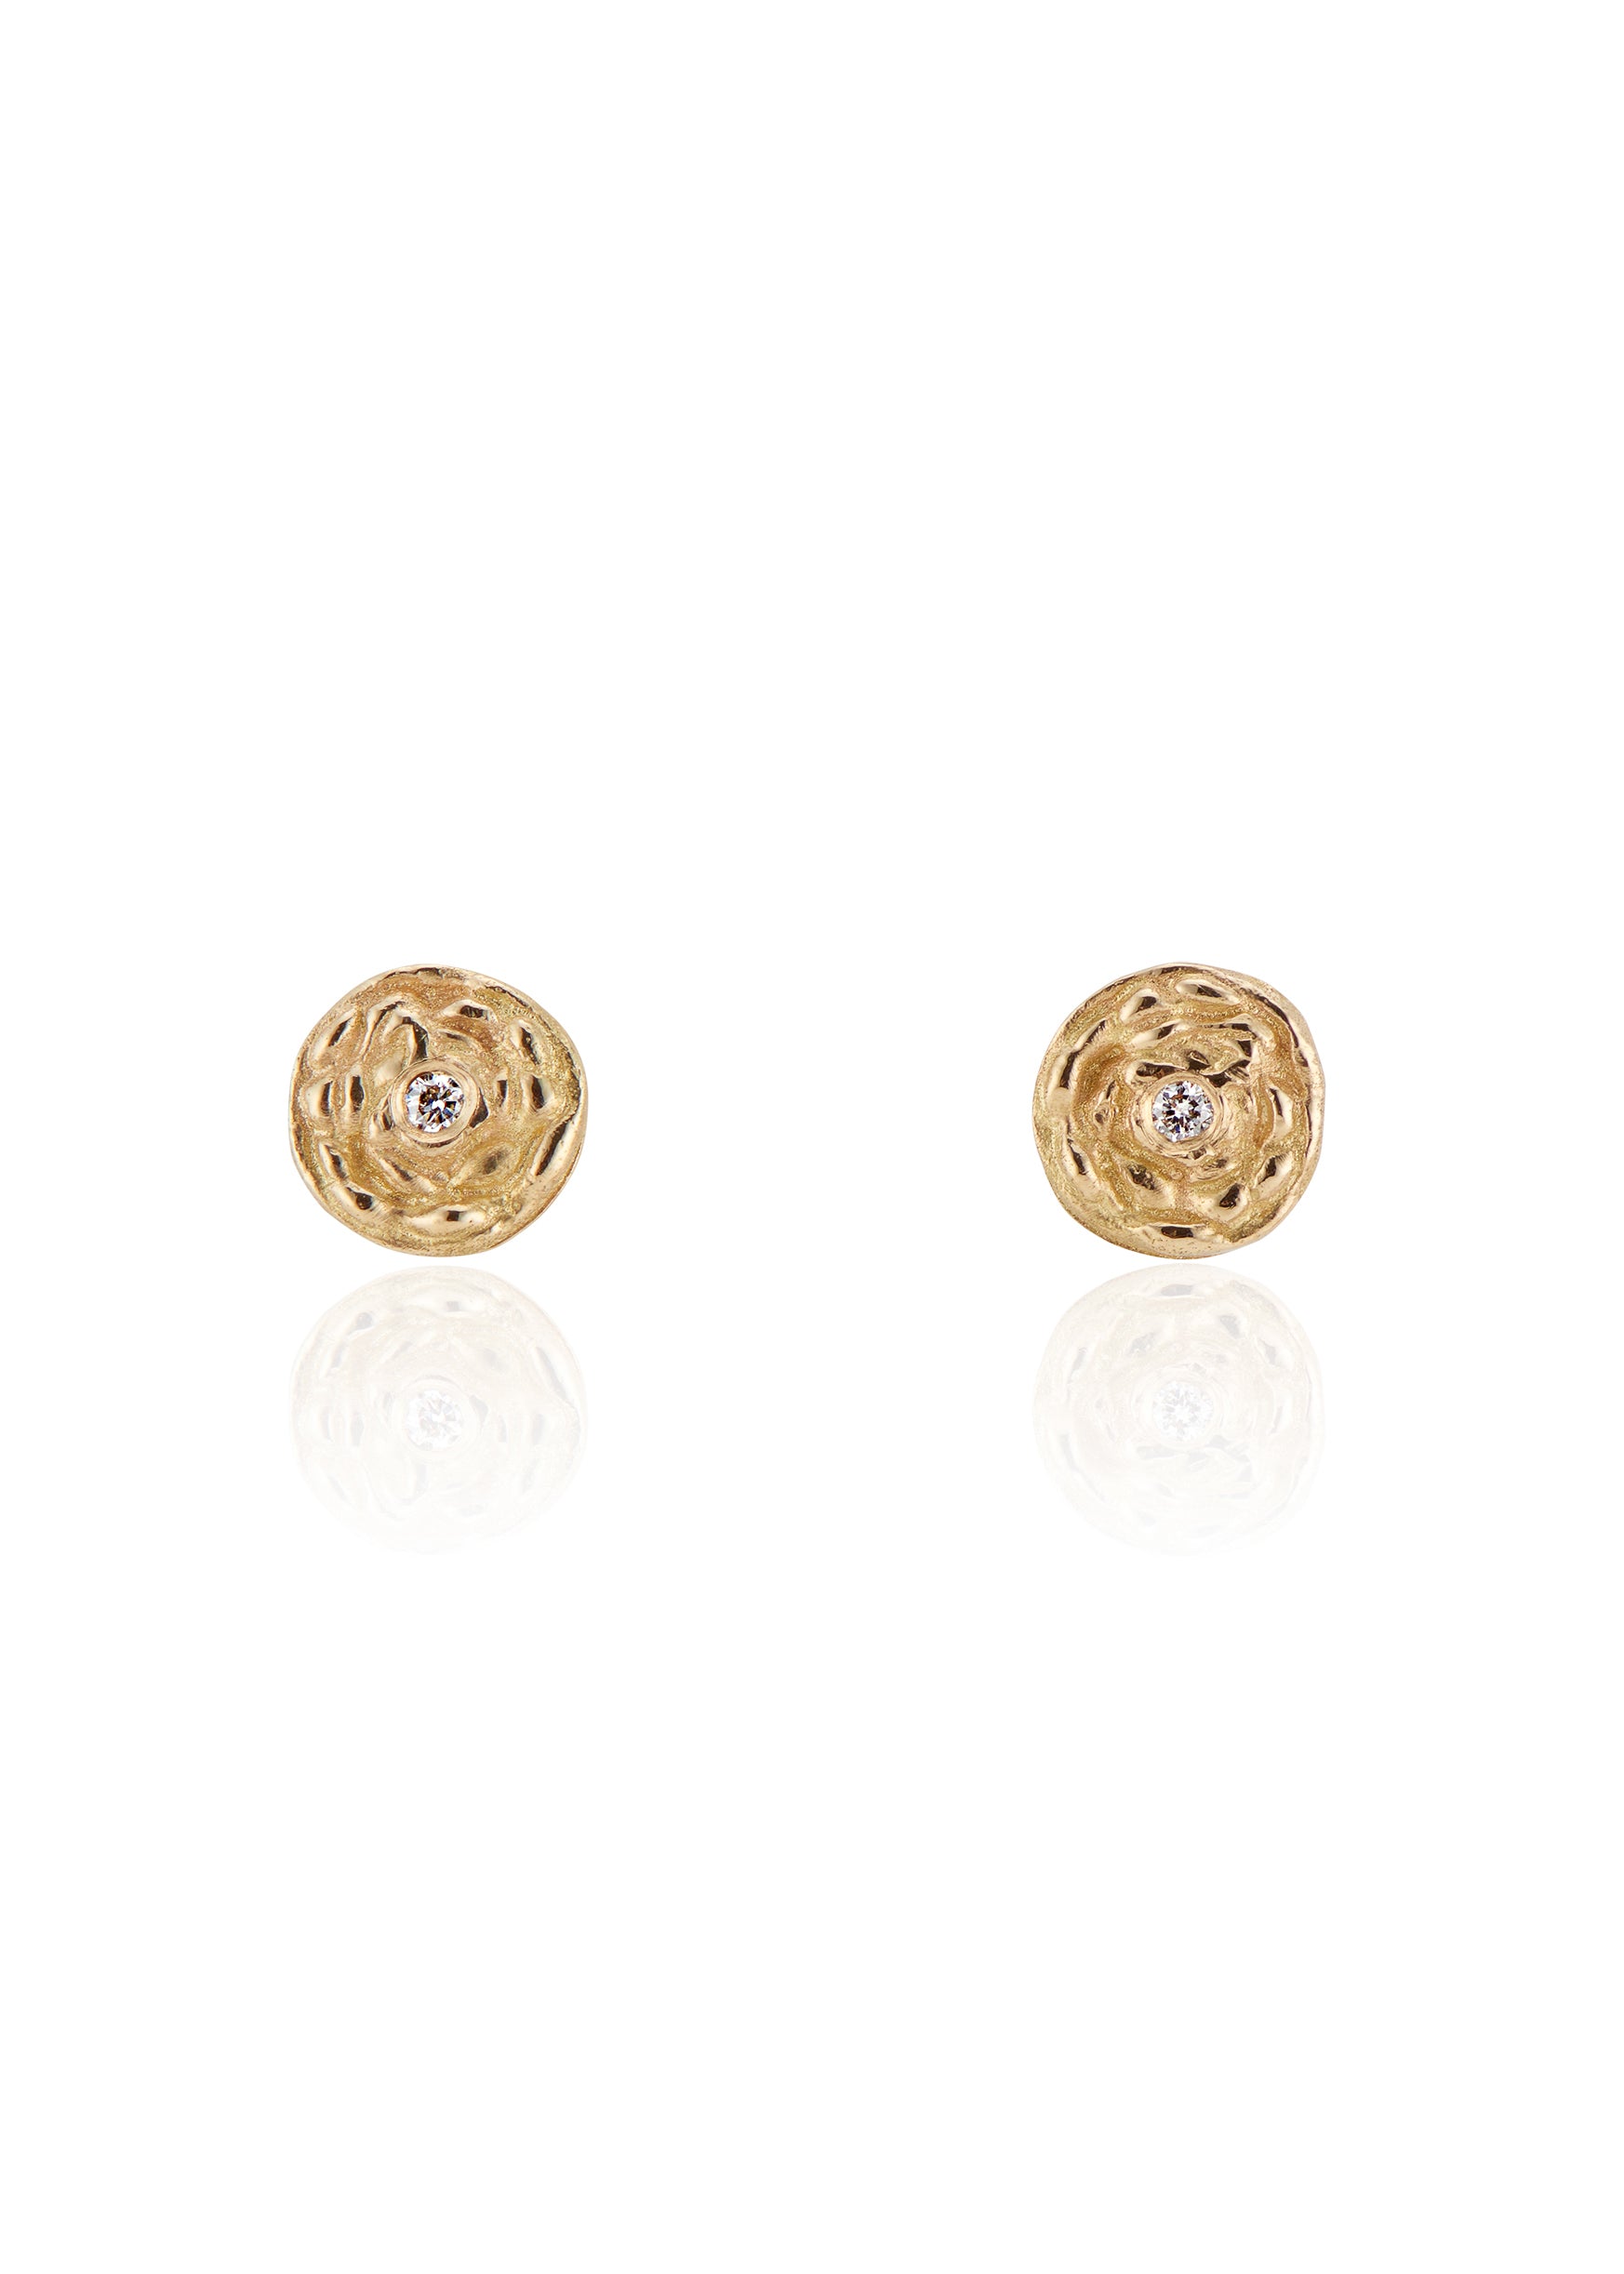 Like an echo of the past that comes full circle, the Beaded earring captures old world craftsmanship made modern for today’s everyday wear. Hand-carved beads create a stunning spiral, drawing the eye in to a brilliant diamond accent. 